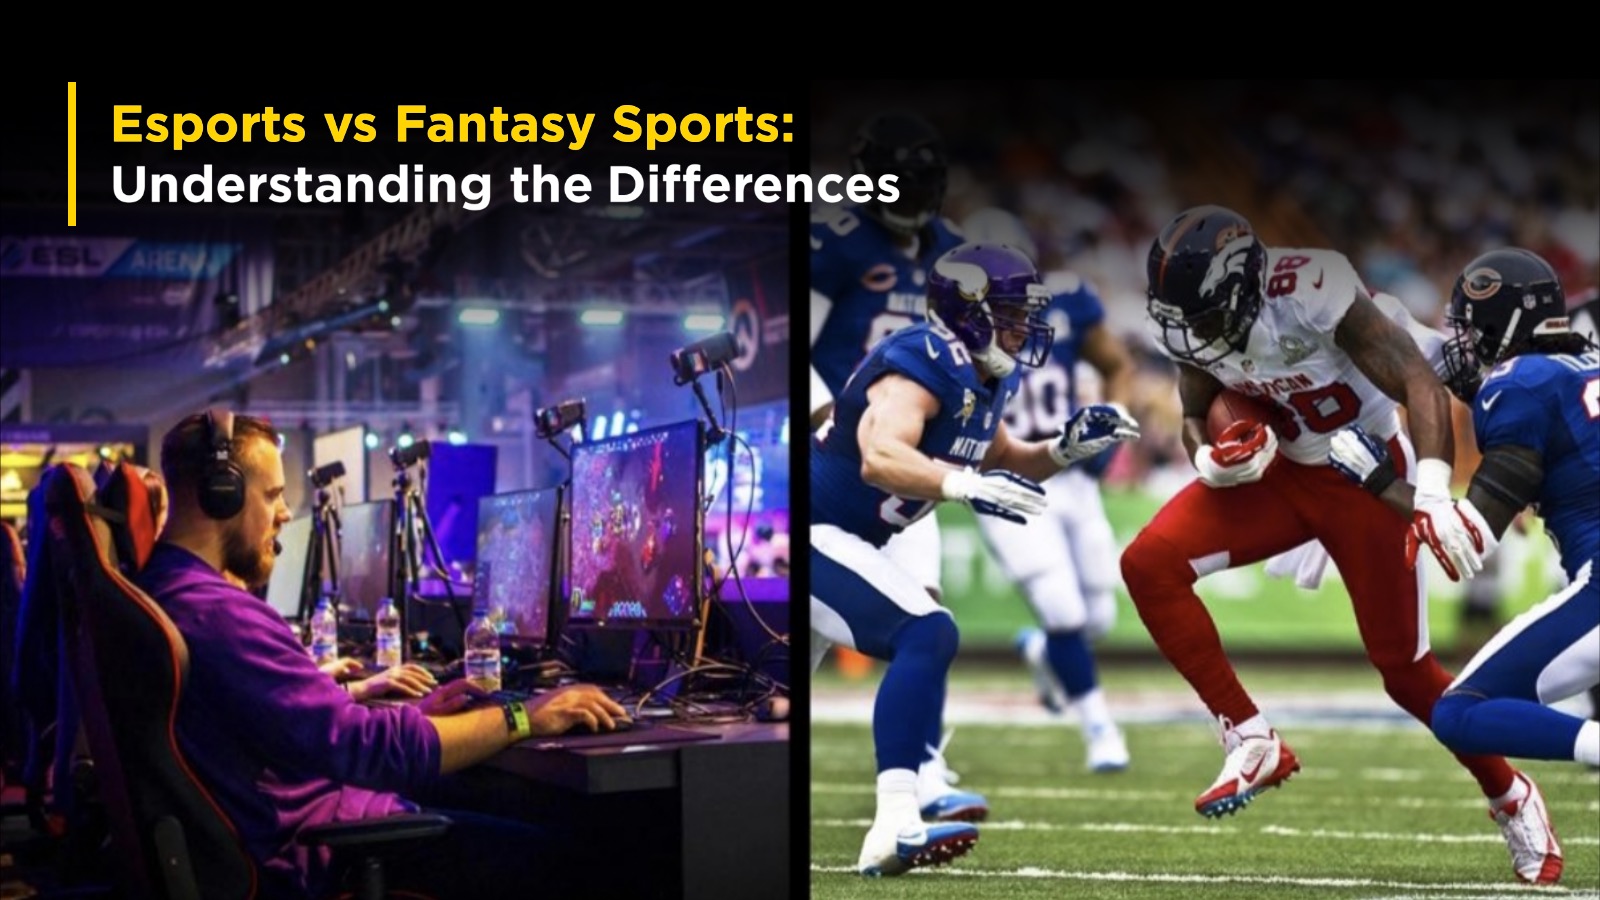 Esports vs Fantasy Sports: Understanding the Differences